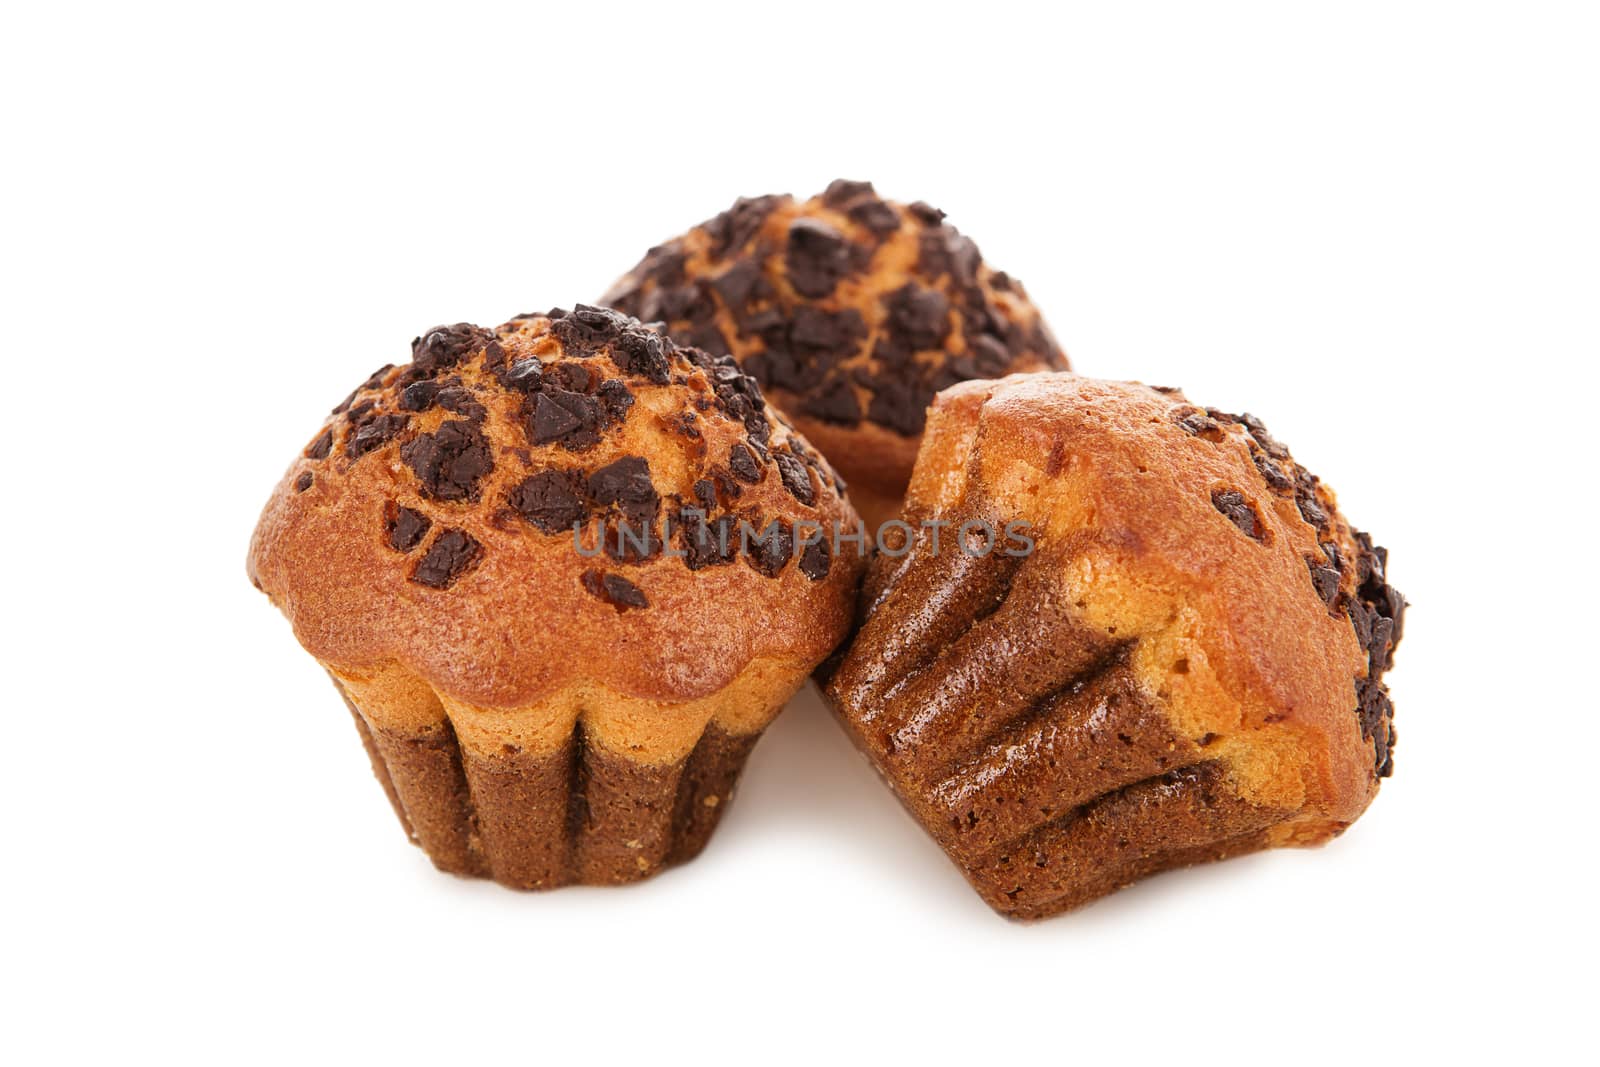 Tasty muffins with chocolate chips isolated on white background